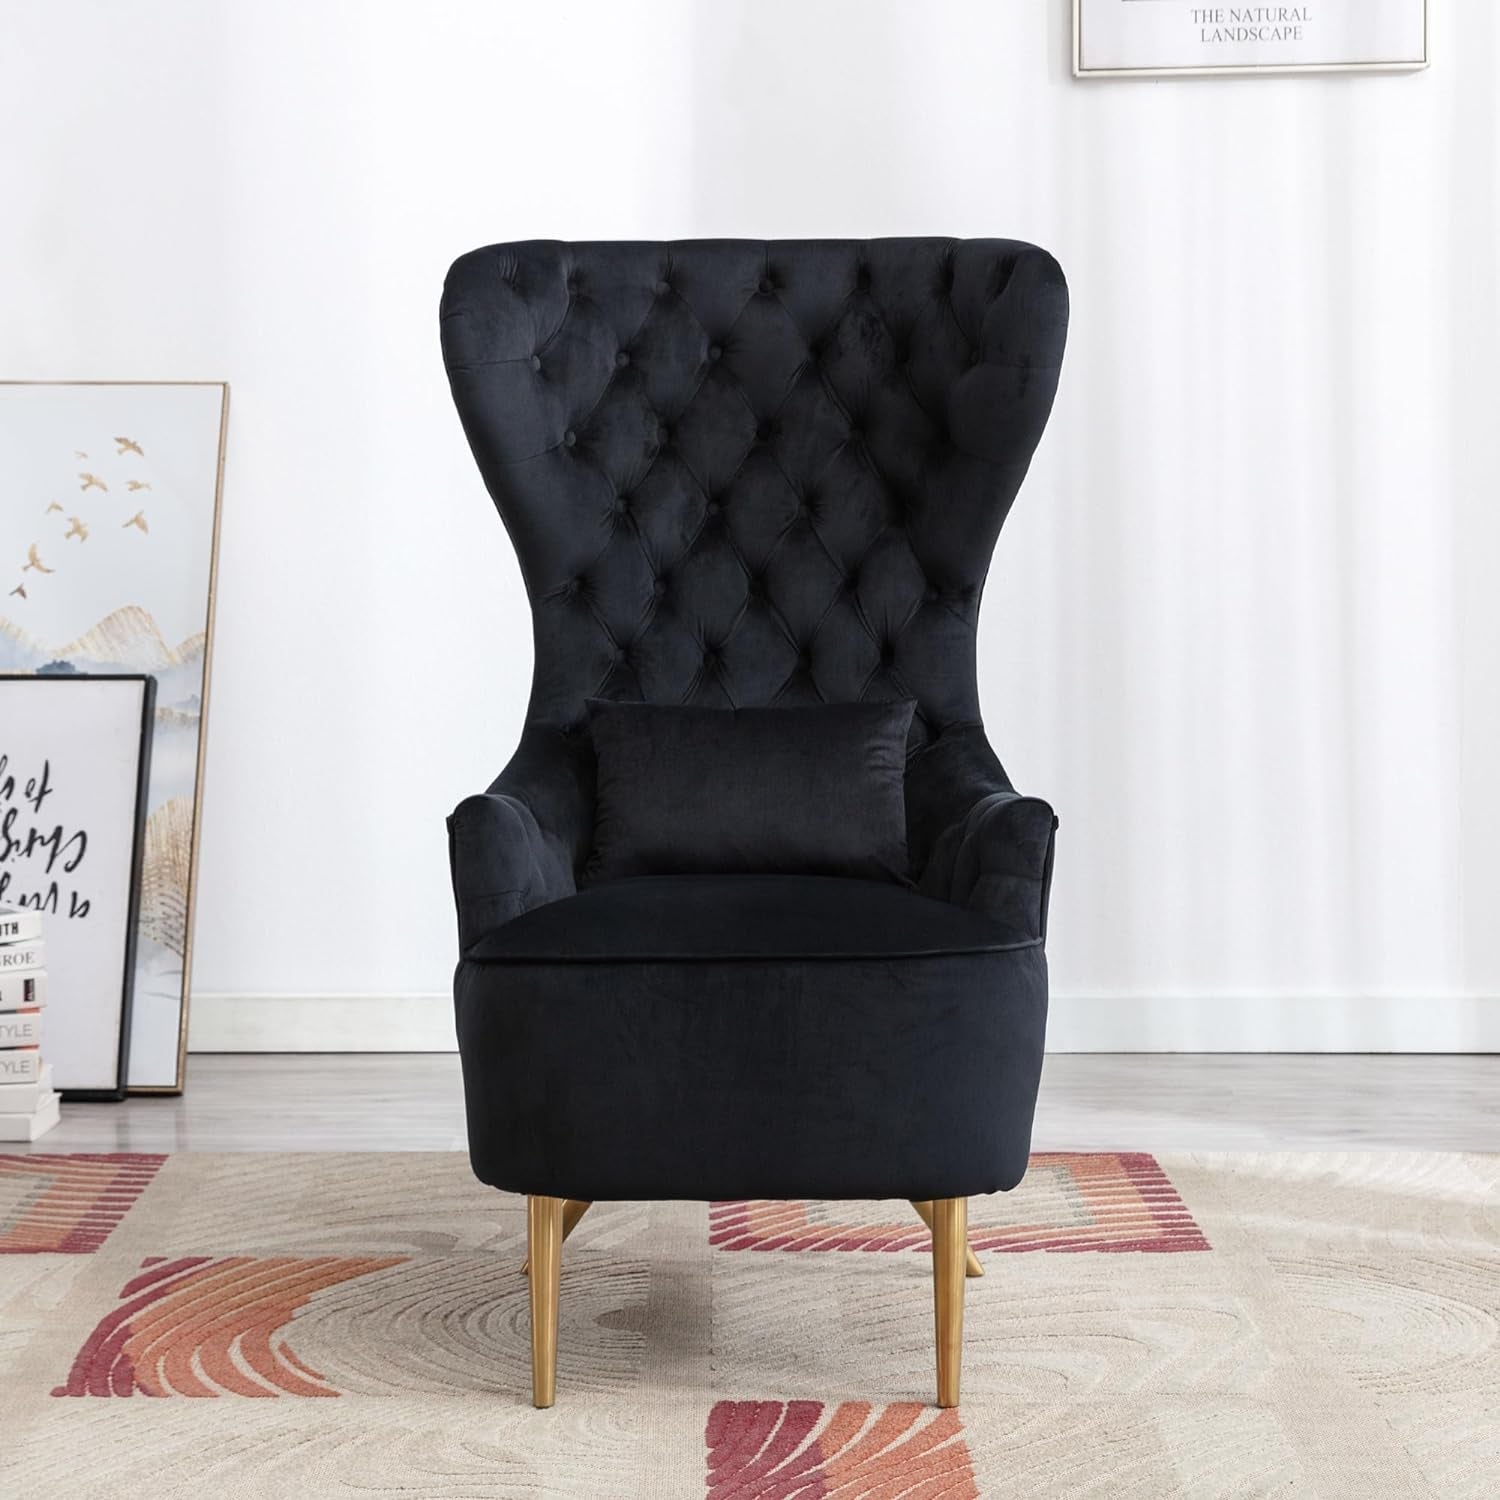 30" W Tufted Velvet Upholstered High Wingback Chair, Mid Century Modern Armchair Accent Chair with Toss Pillow Metal Legs for Living Room Bedroom Apartment Lounge Nursery, Black